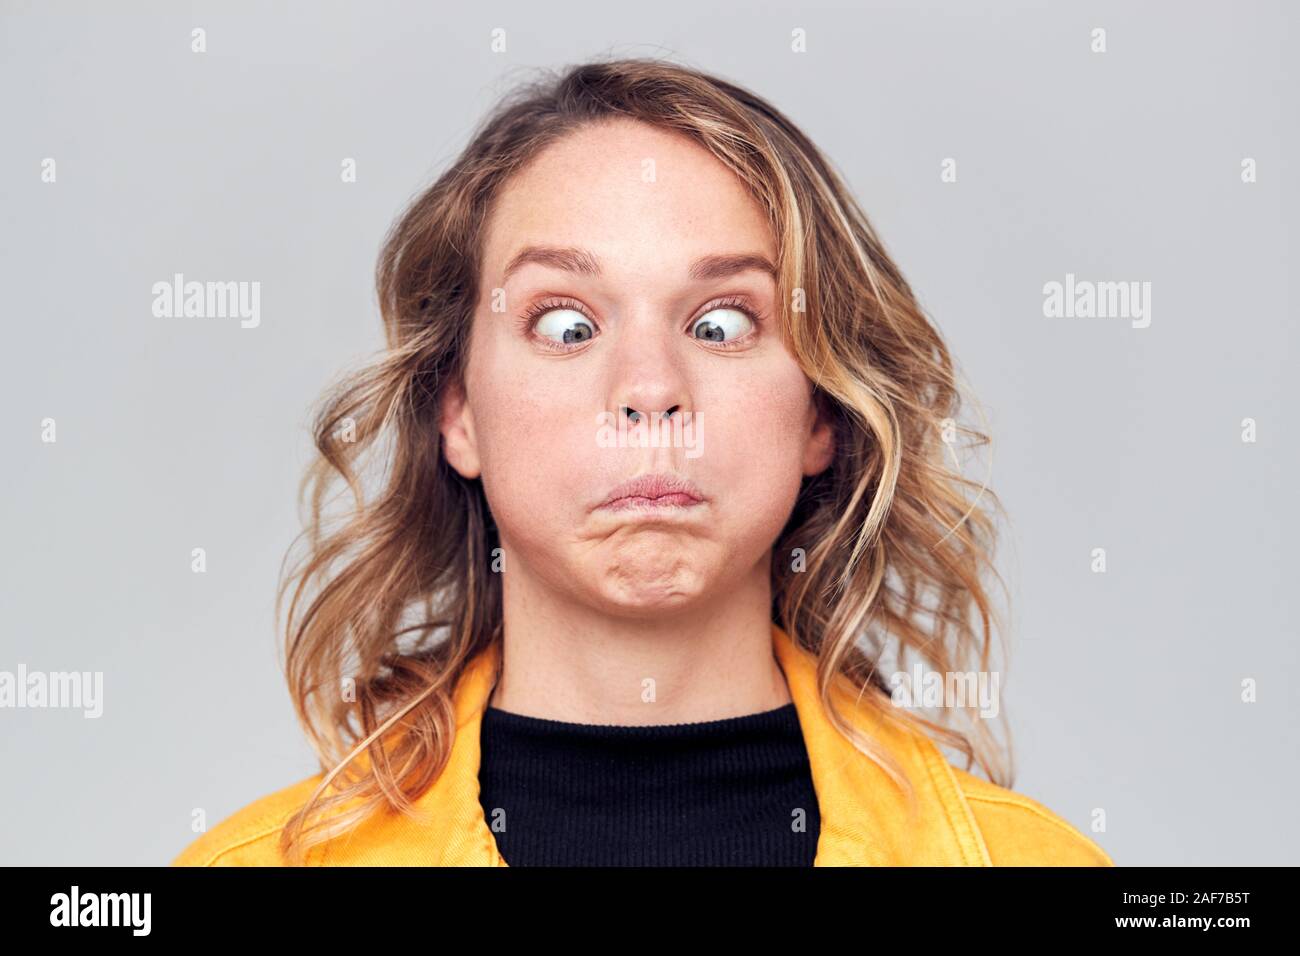 Head And Shoulders Studio Shot Of Woman Pulling Faces And Smiling At Camera Stock Photo